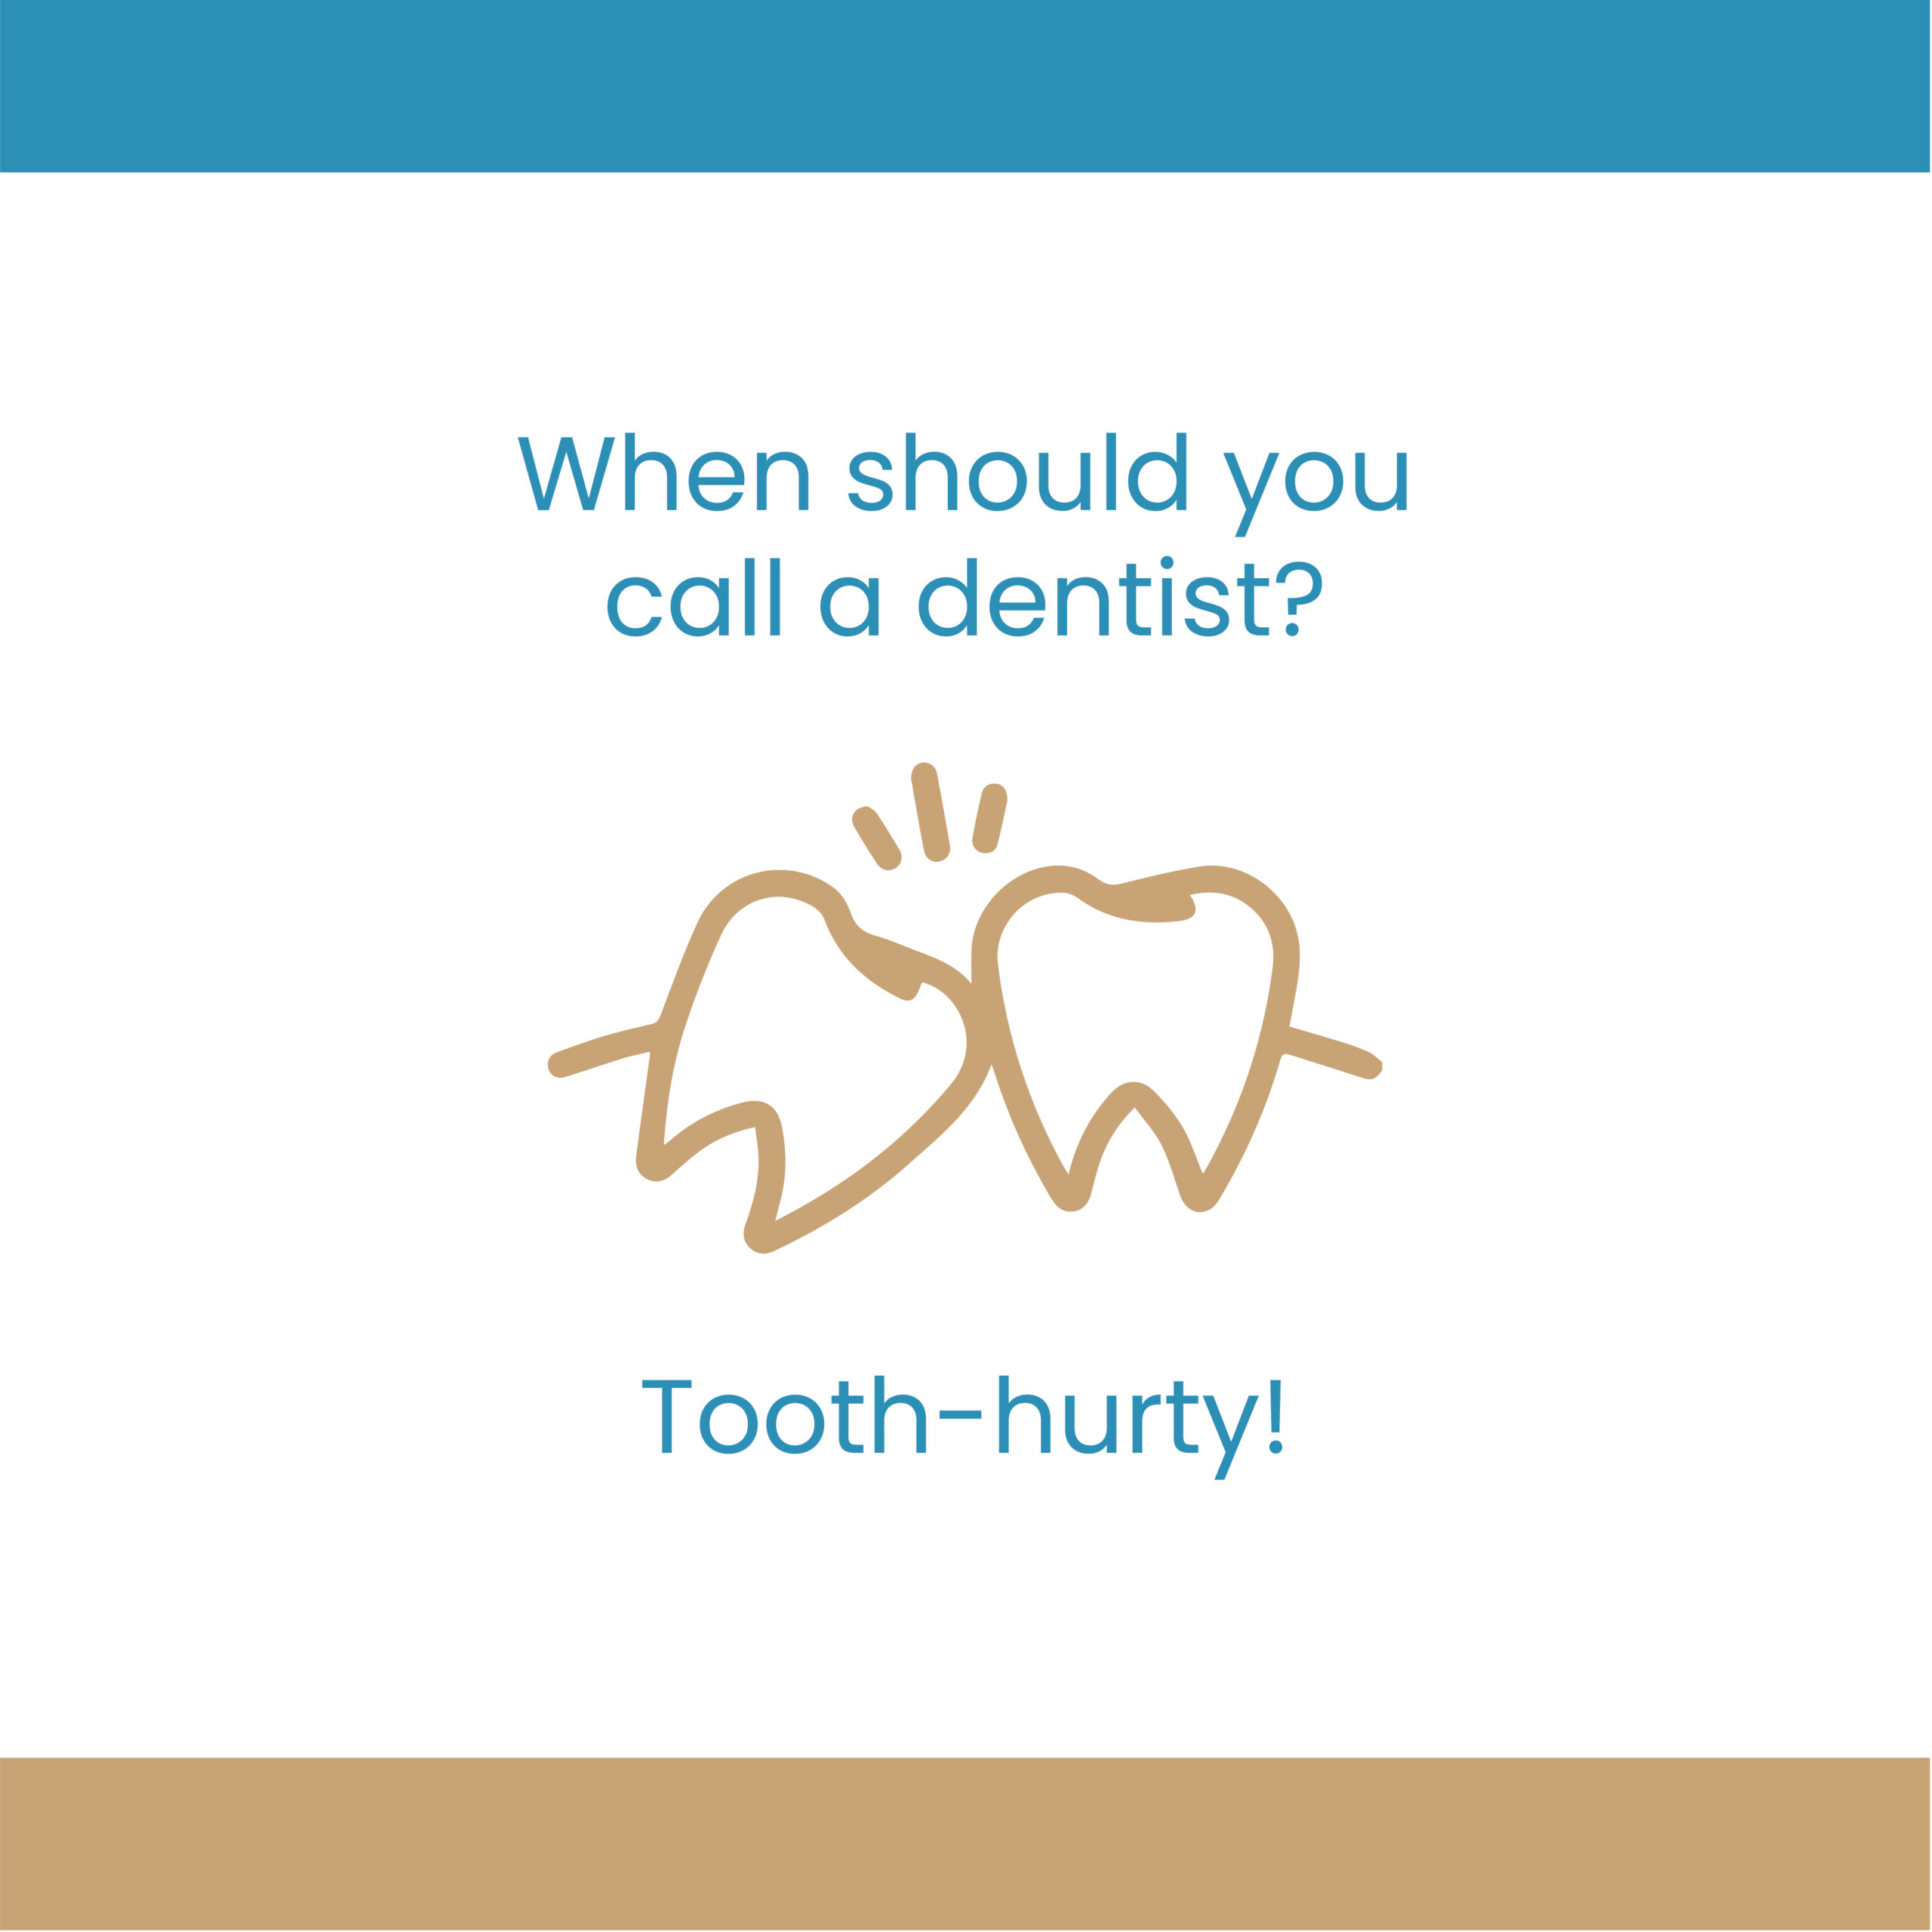 When should you call a dentist?